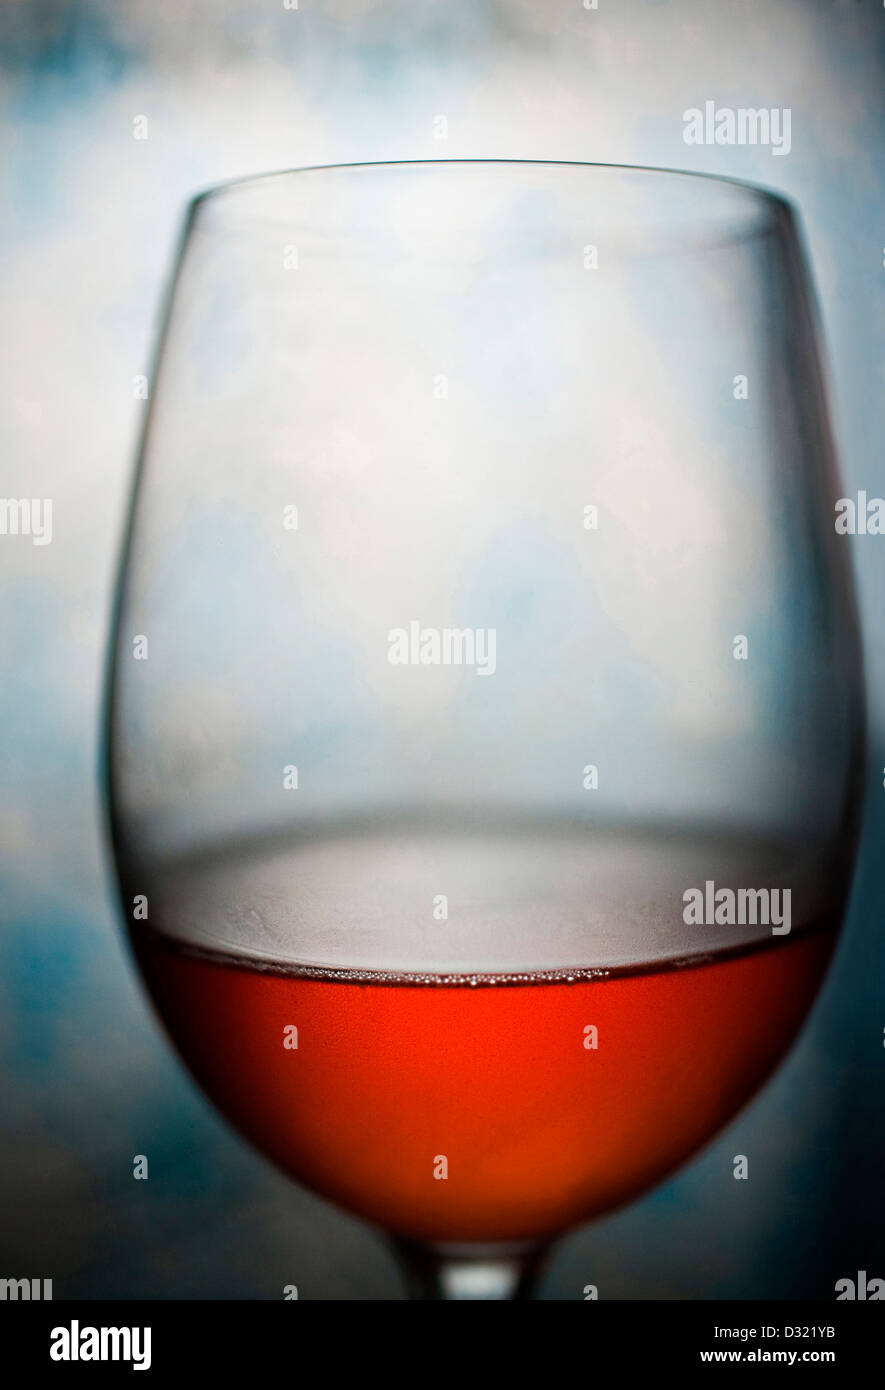 Glass of red wine Stock Photo